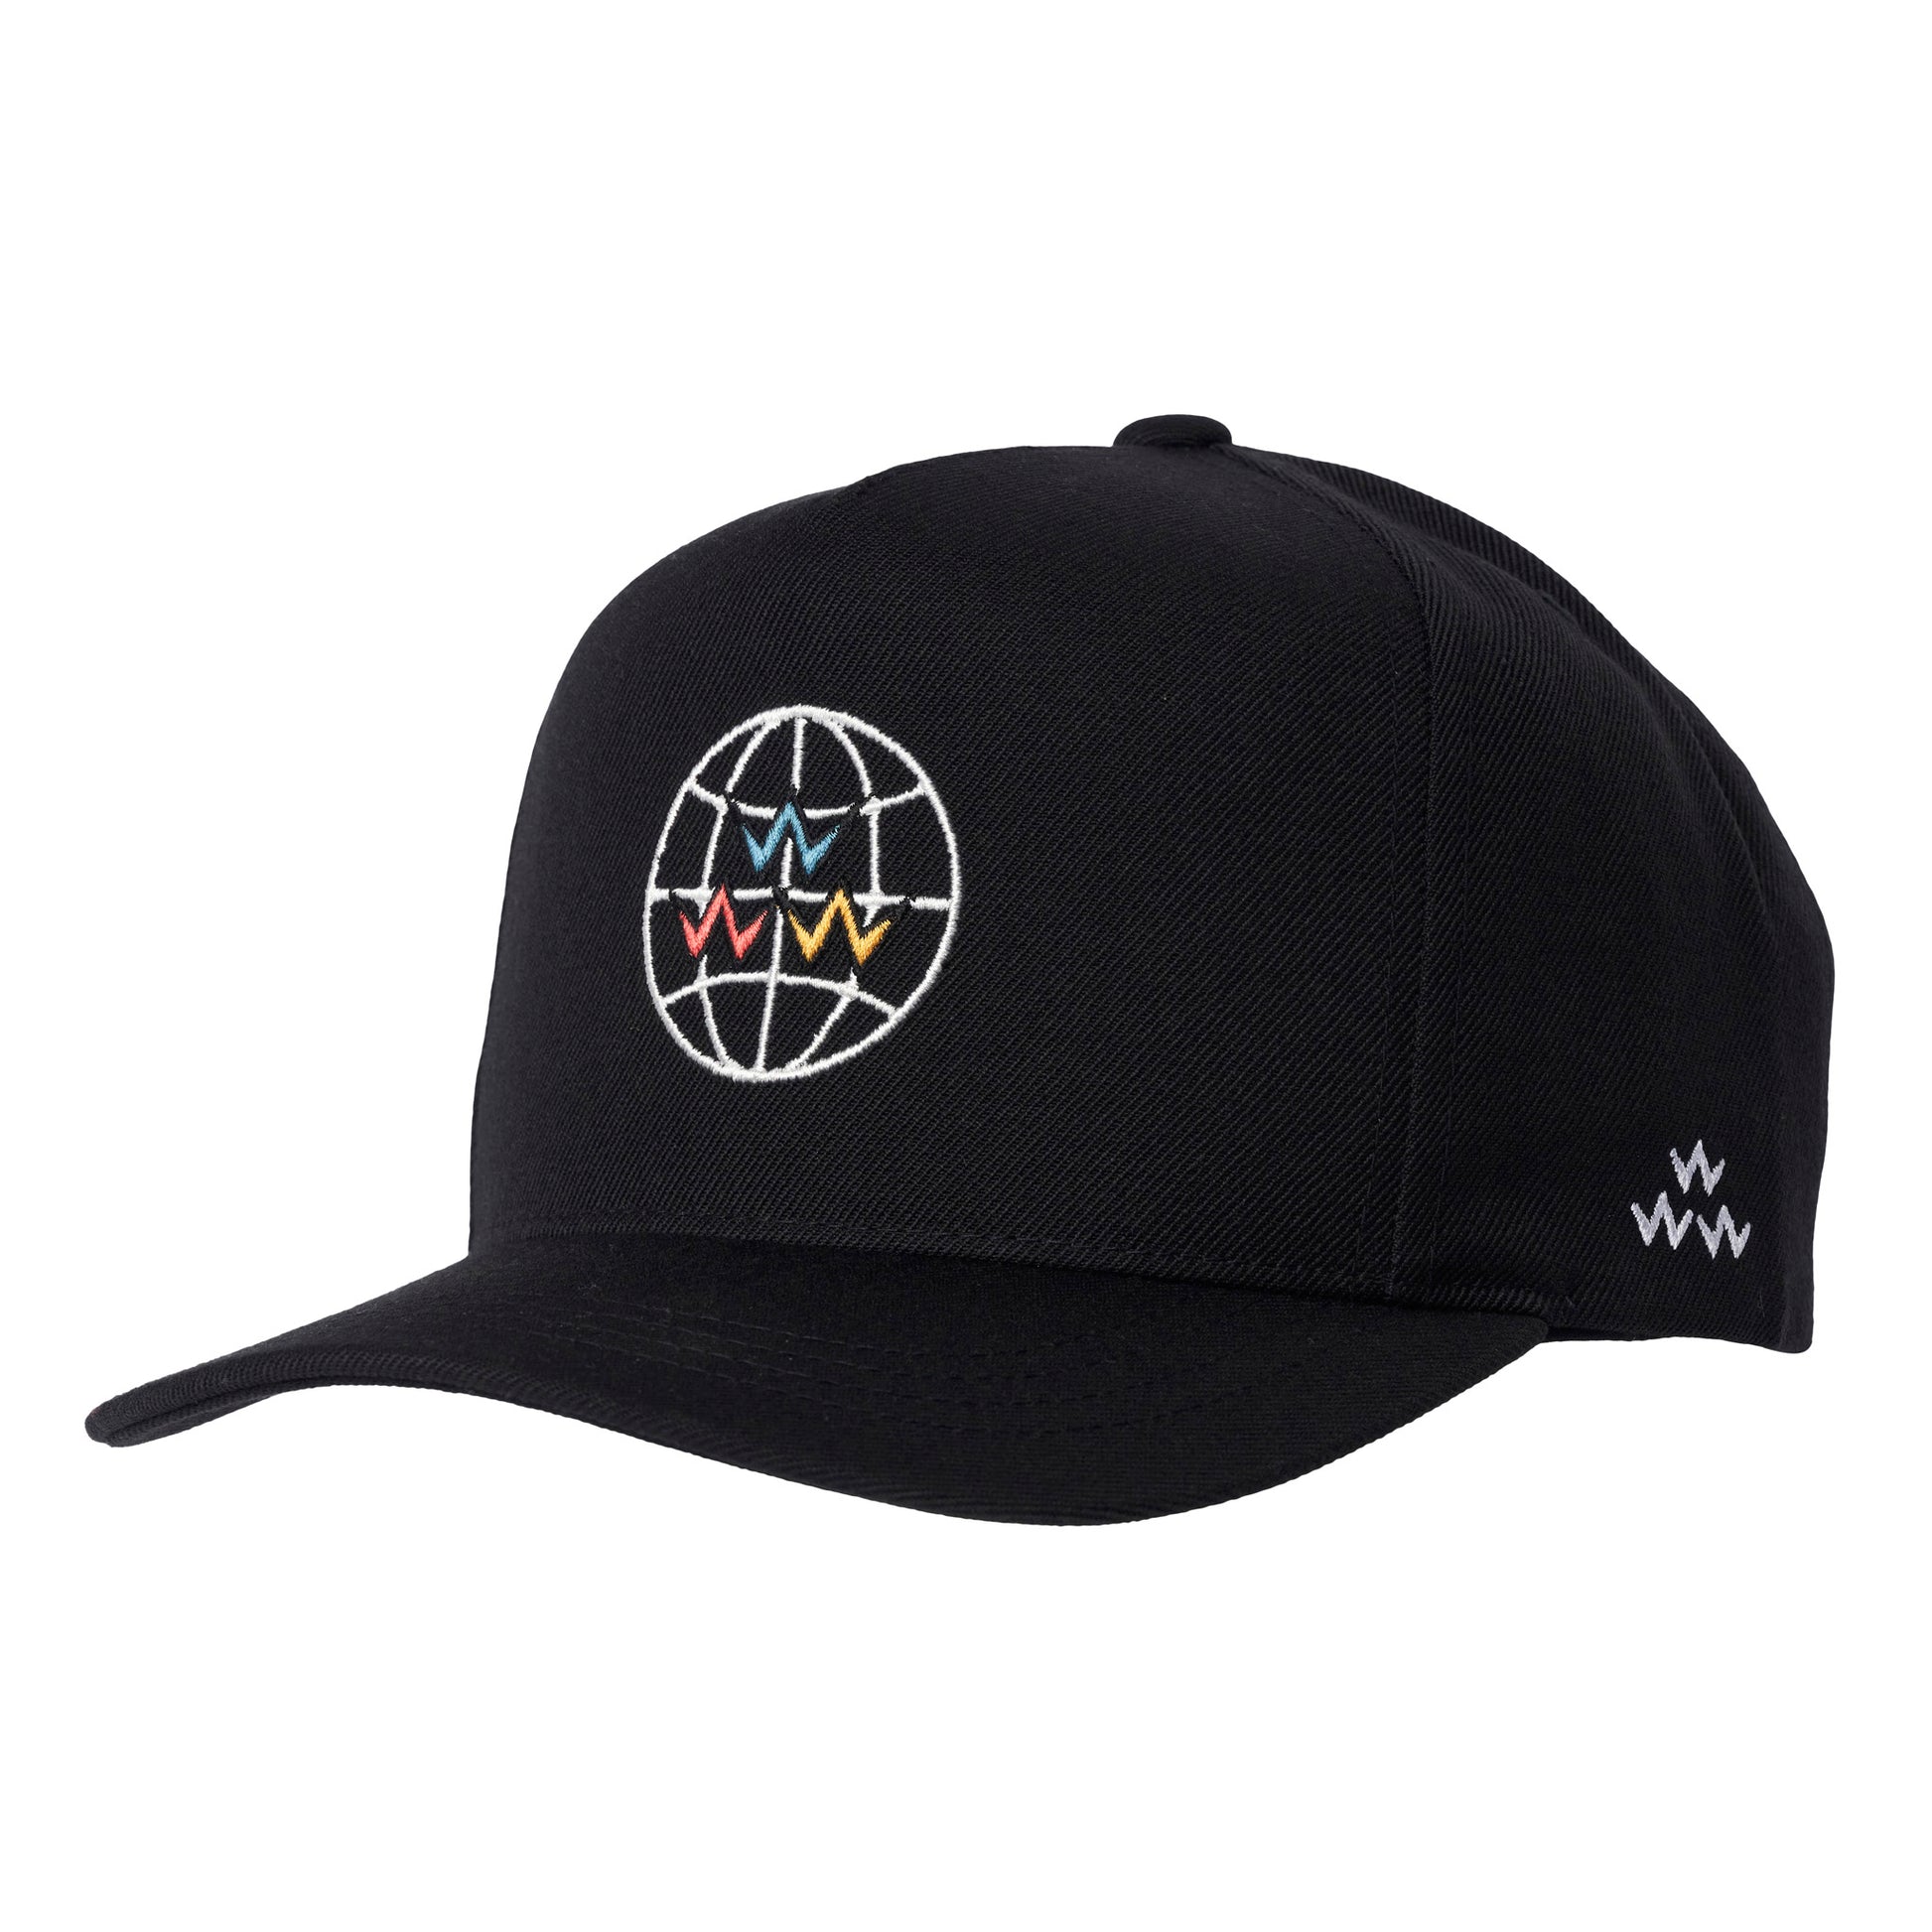 Front view of Black 5-Panel Golf Cap with Plastic Snap Curve Brim, Wool/Acrylic Blend, and Signature Birds of Condor Internal Taping